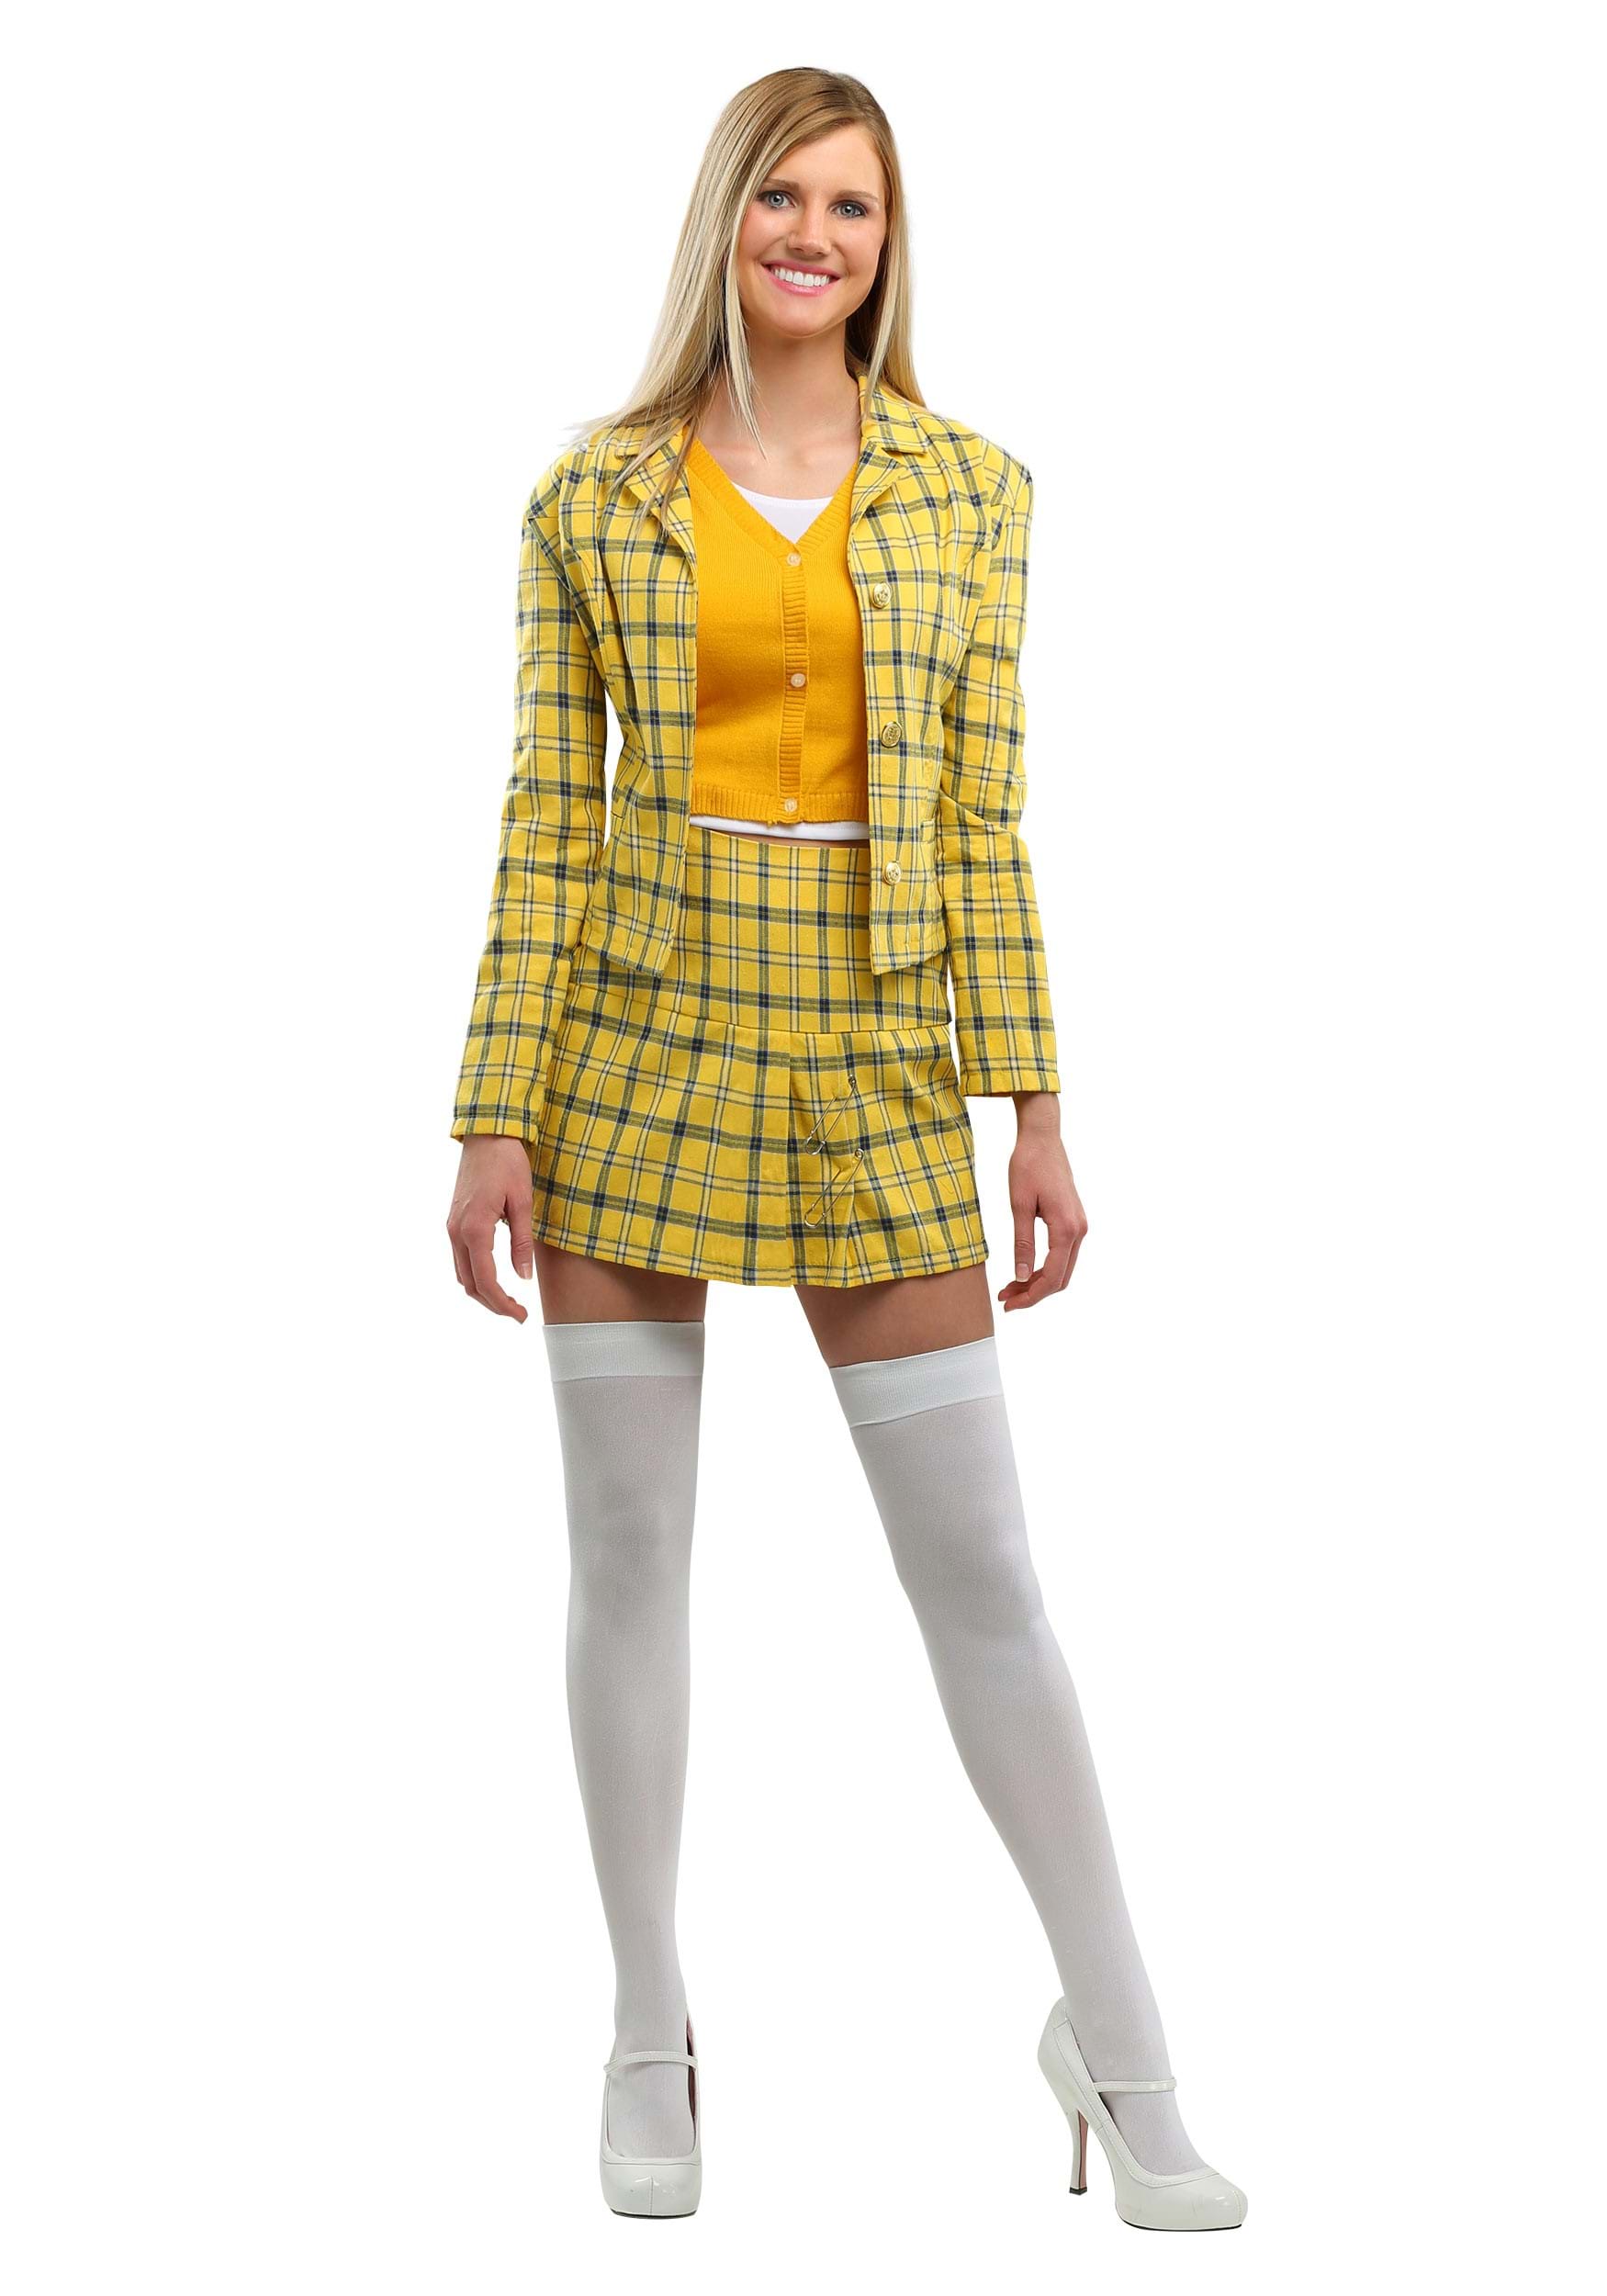 Clueless Cher Plus Size Costume For Women , 90s Movie Costume